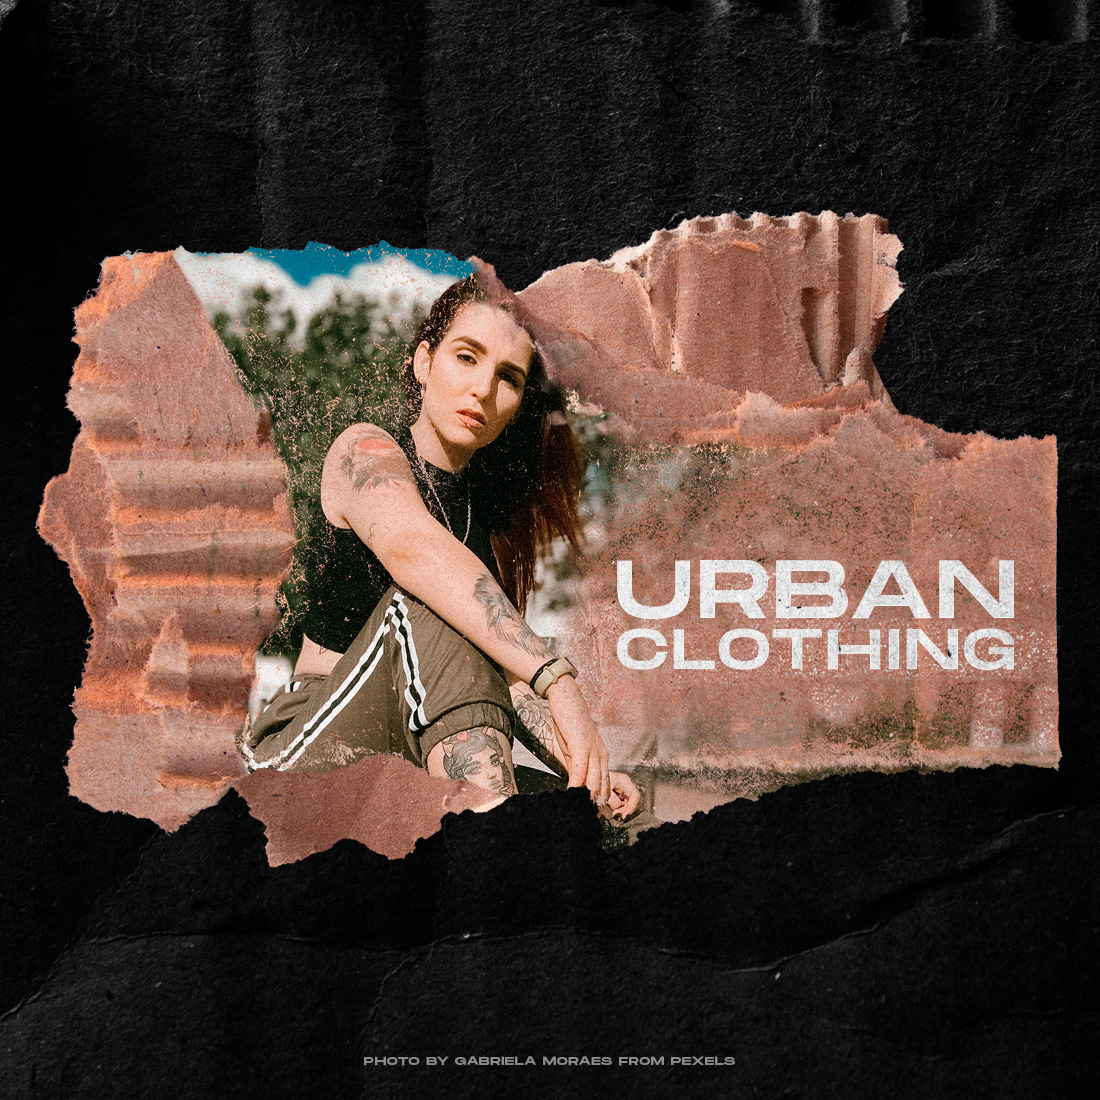 Urban Clothing Torn Cardboard Textures Preview image.